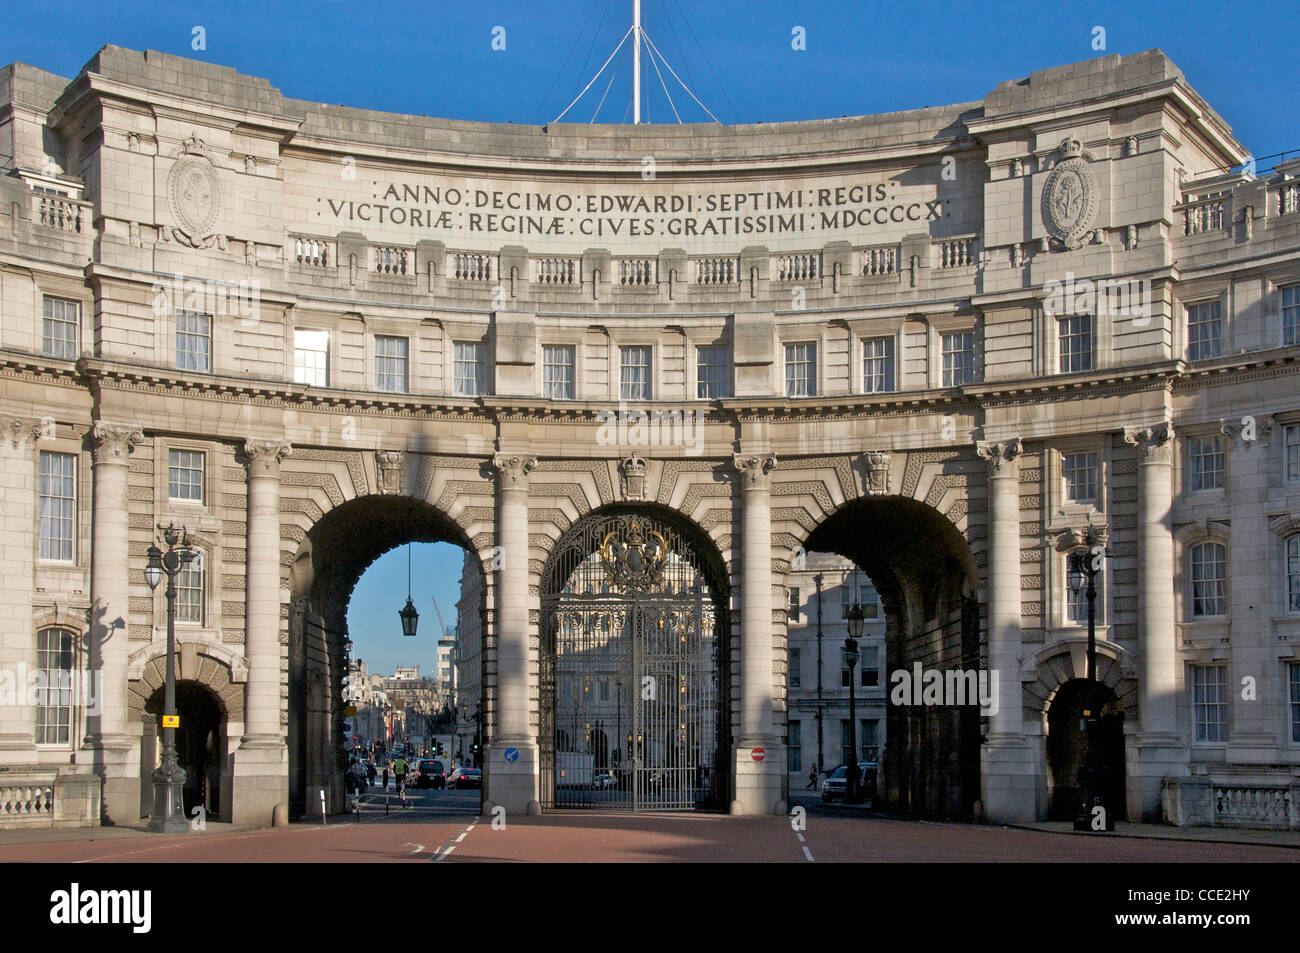 Admiralty Arch Pall Mall London England Stock Photo